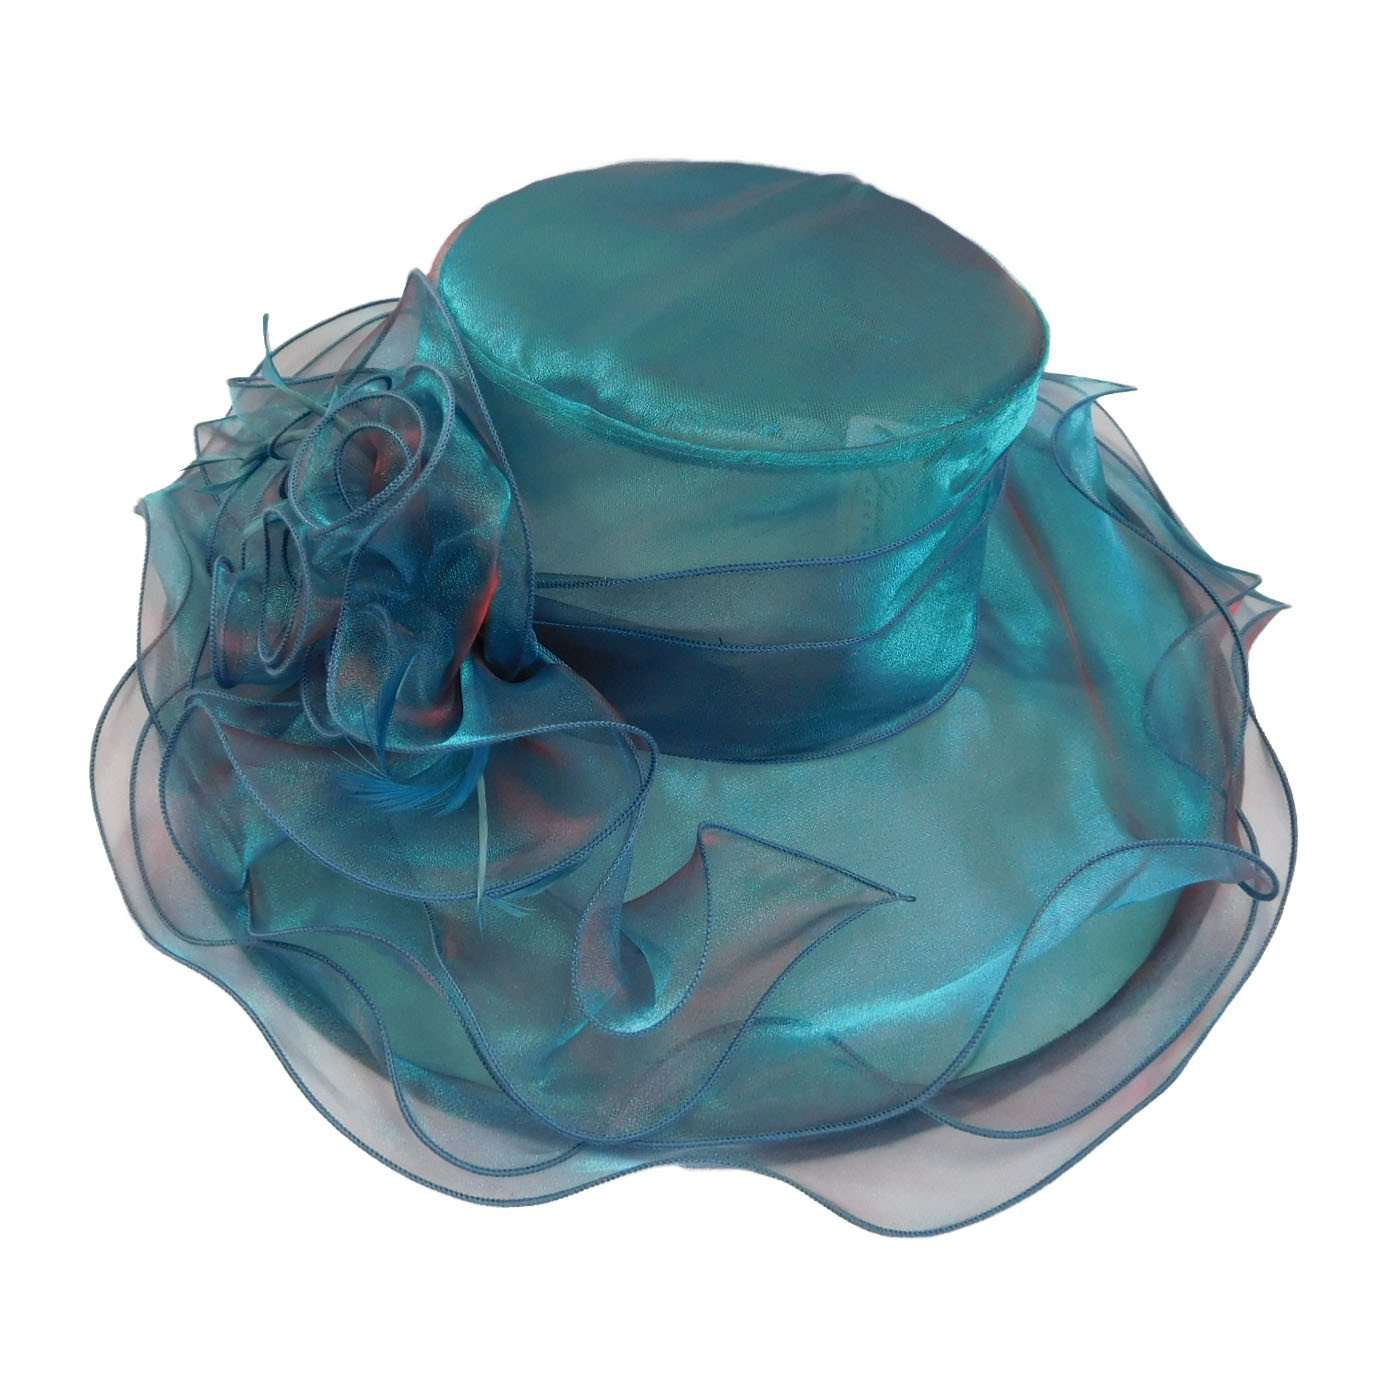 Ruffle Iridescent Organza Hat with Lily Flowers, Dress Hat - SetarTrading Hats 